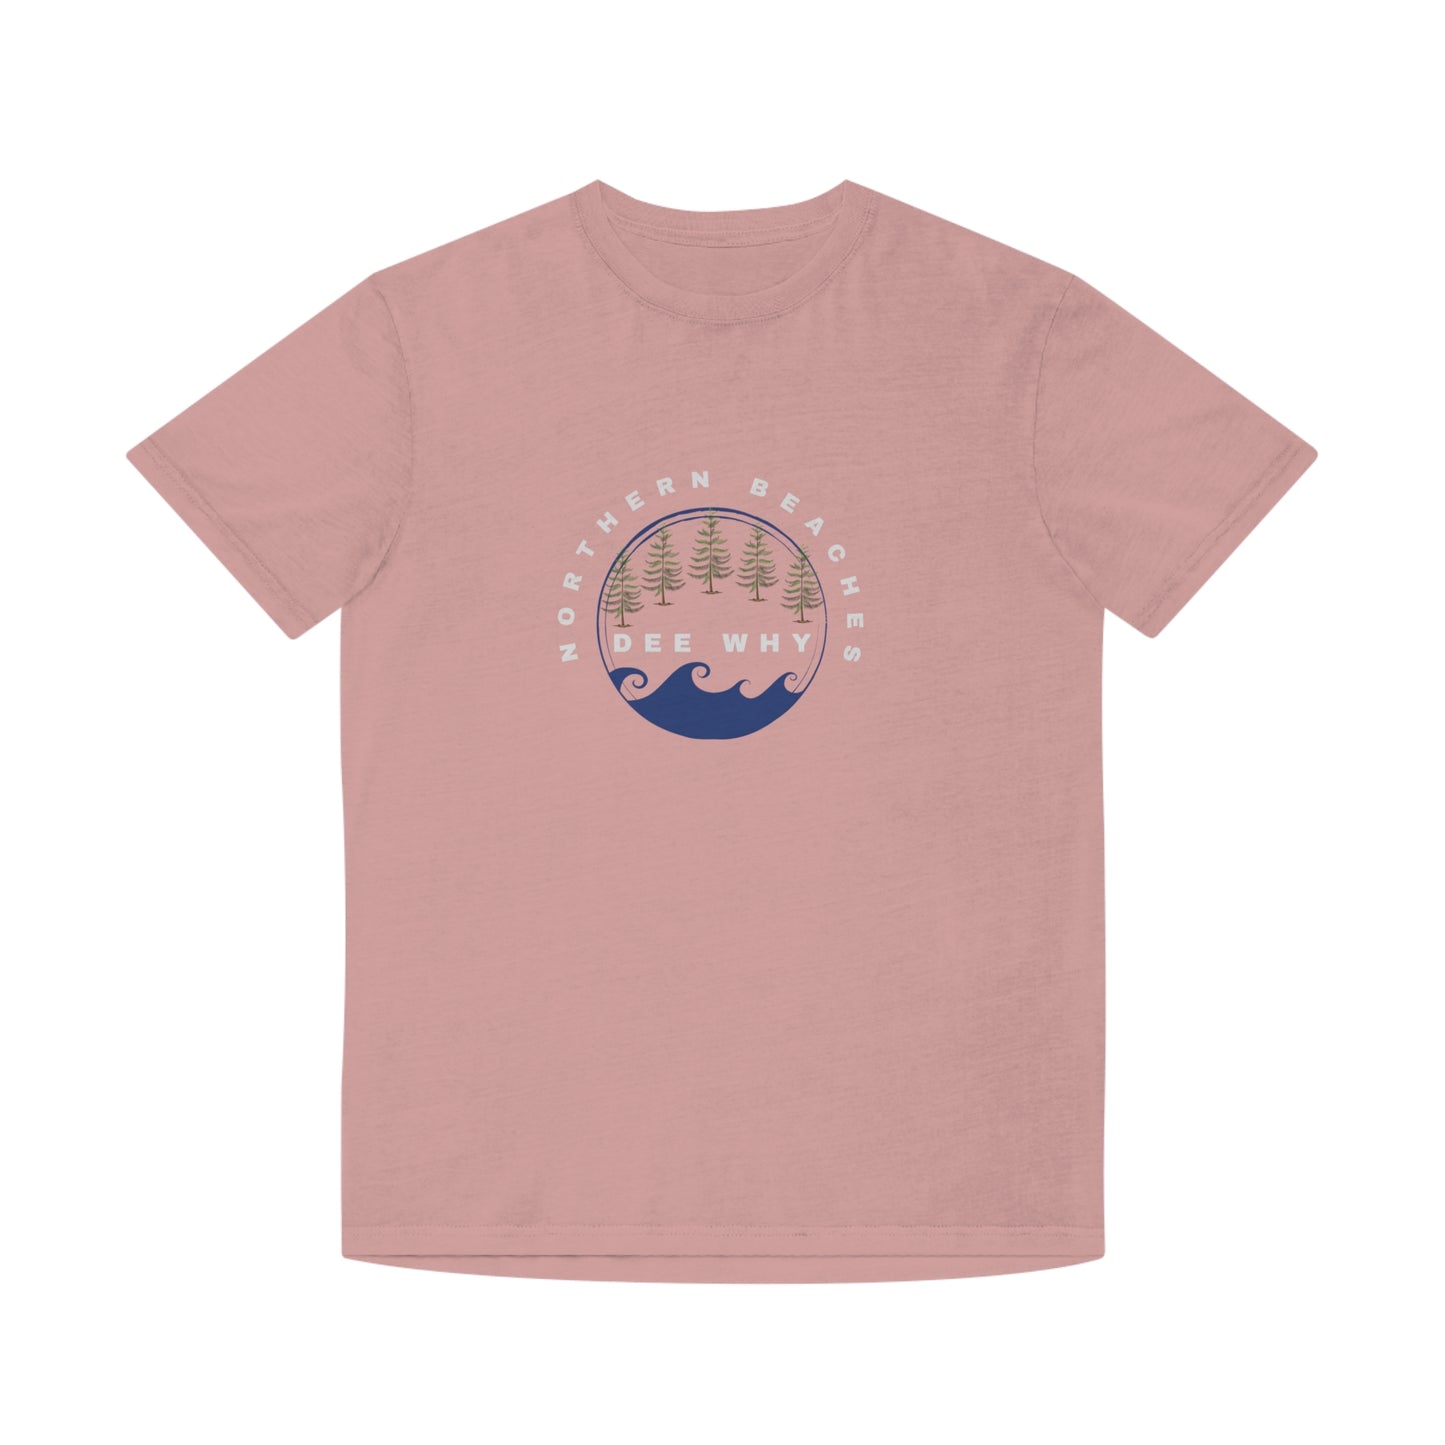 Cotton T-Shirt Northern Beaches Dee Why logo